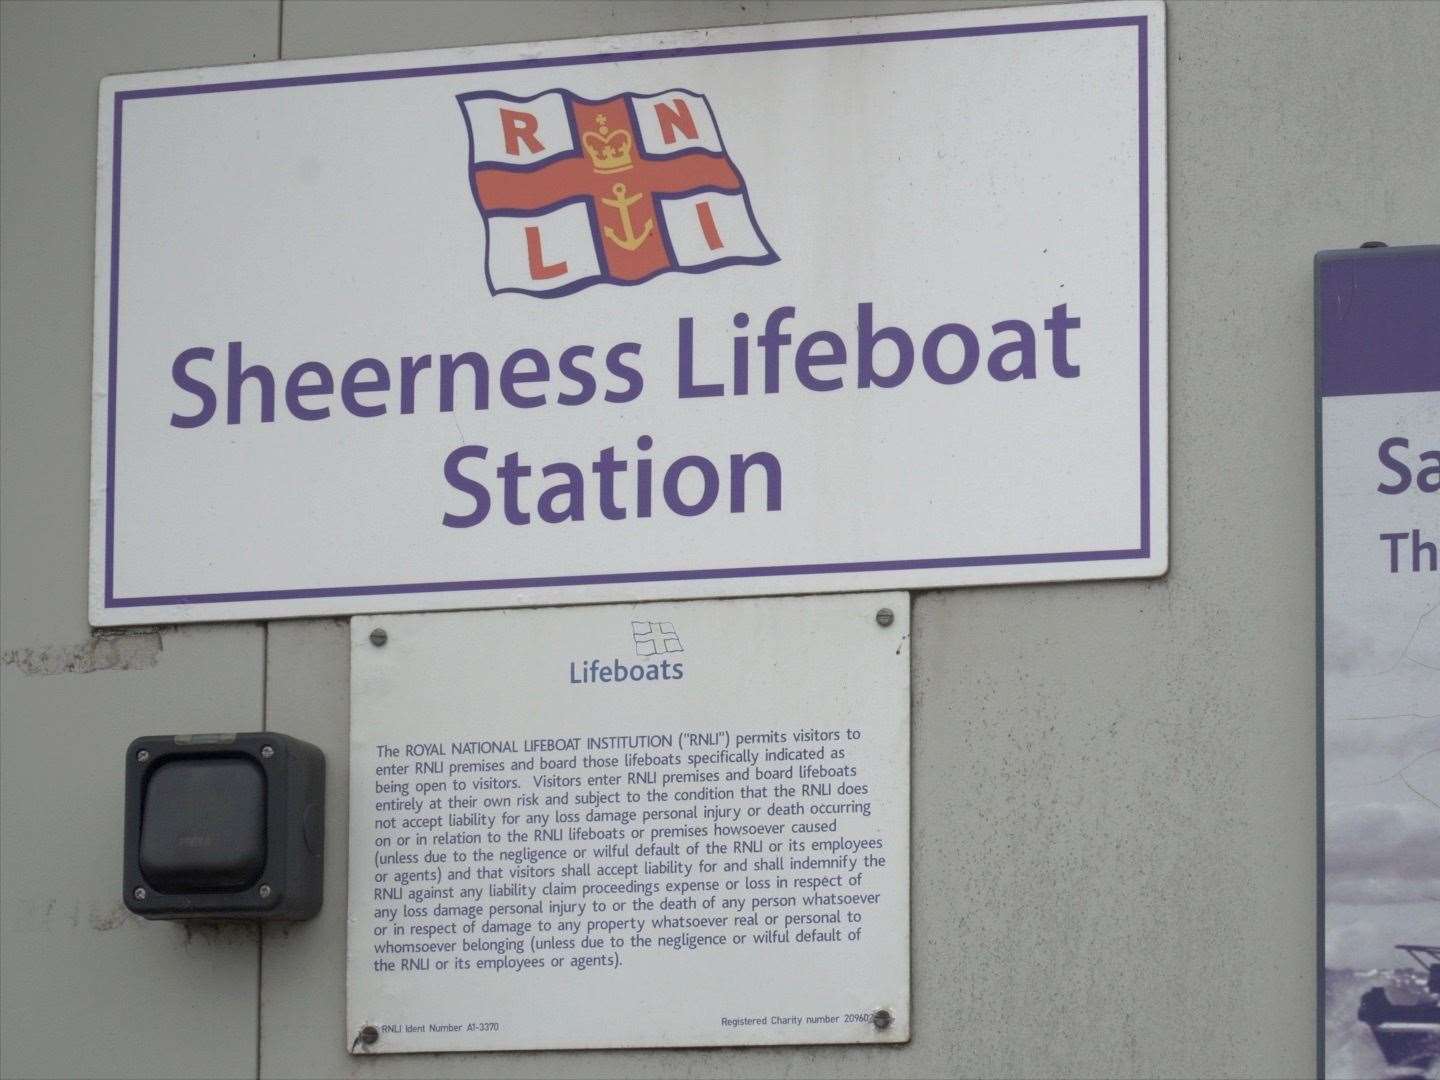 Outside Sheerness Lifeboat Station